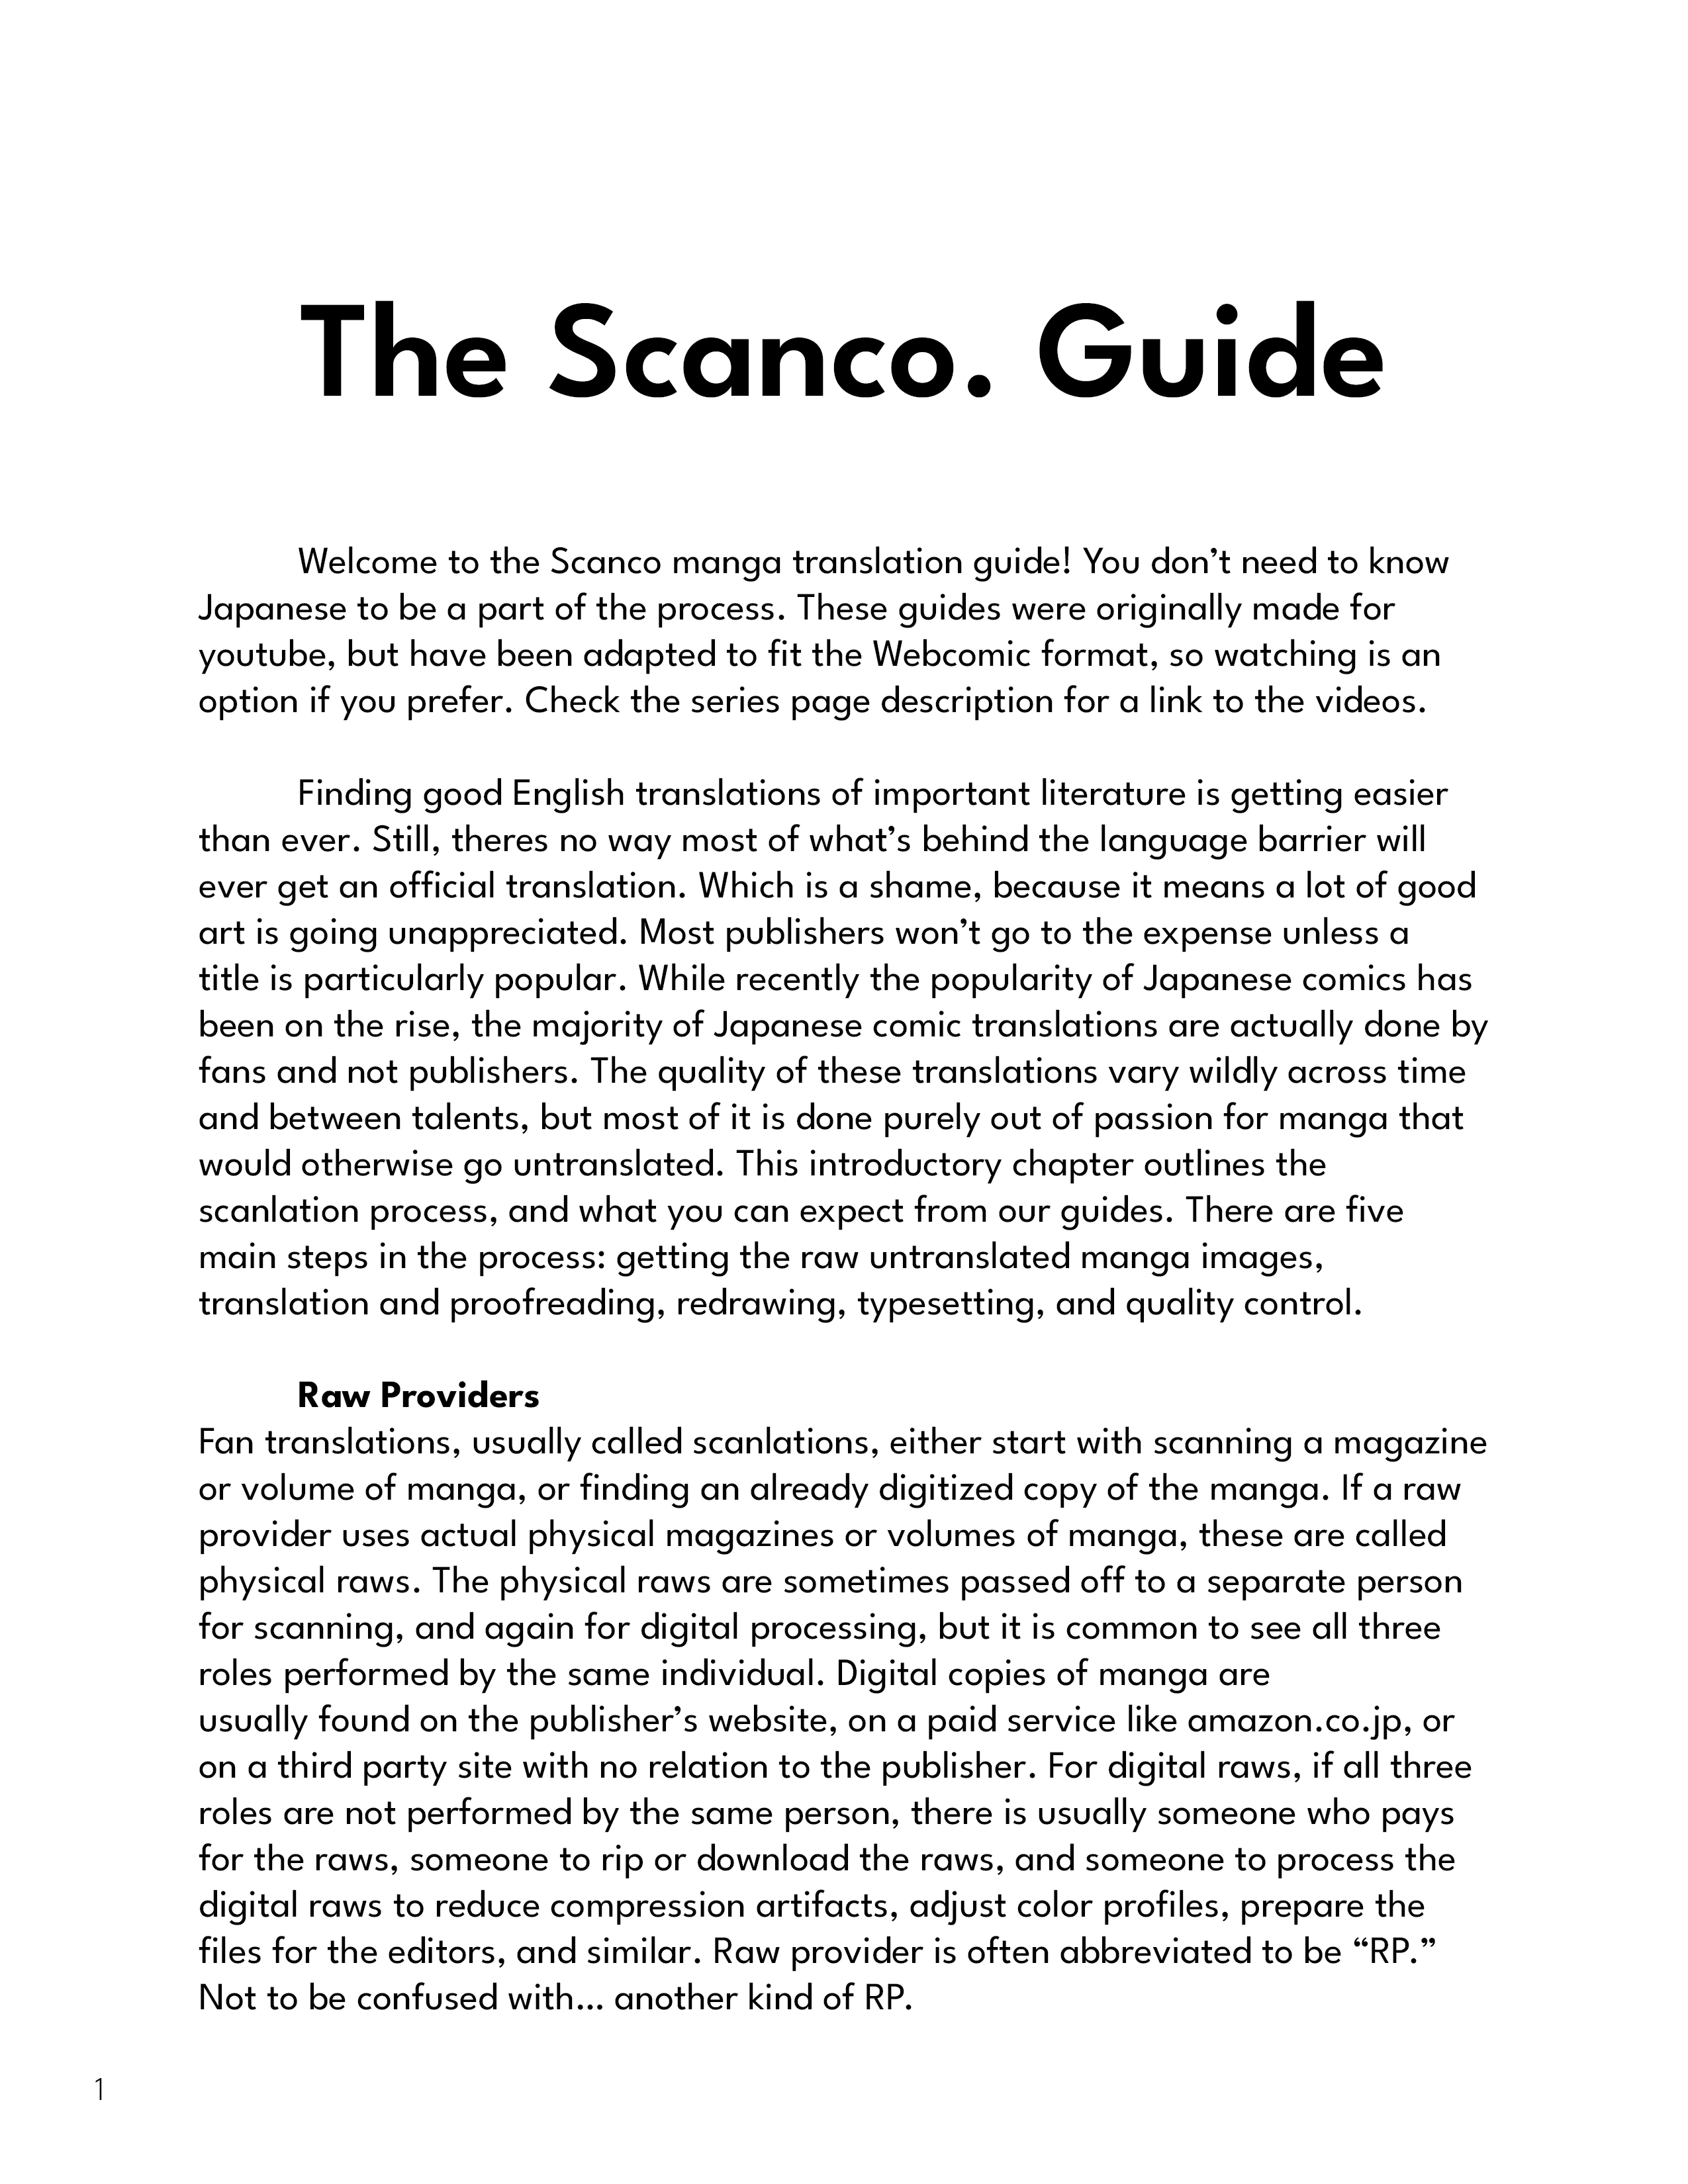 The Scanco. Scanlation Guide Chapter 1 #1